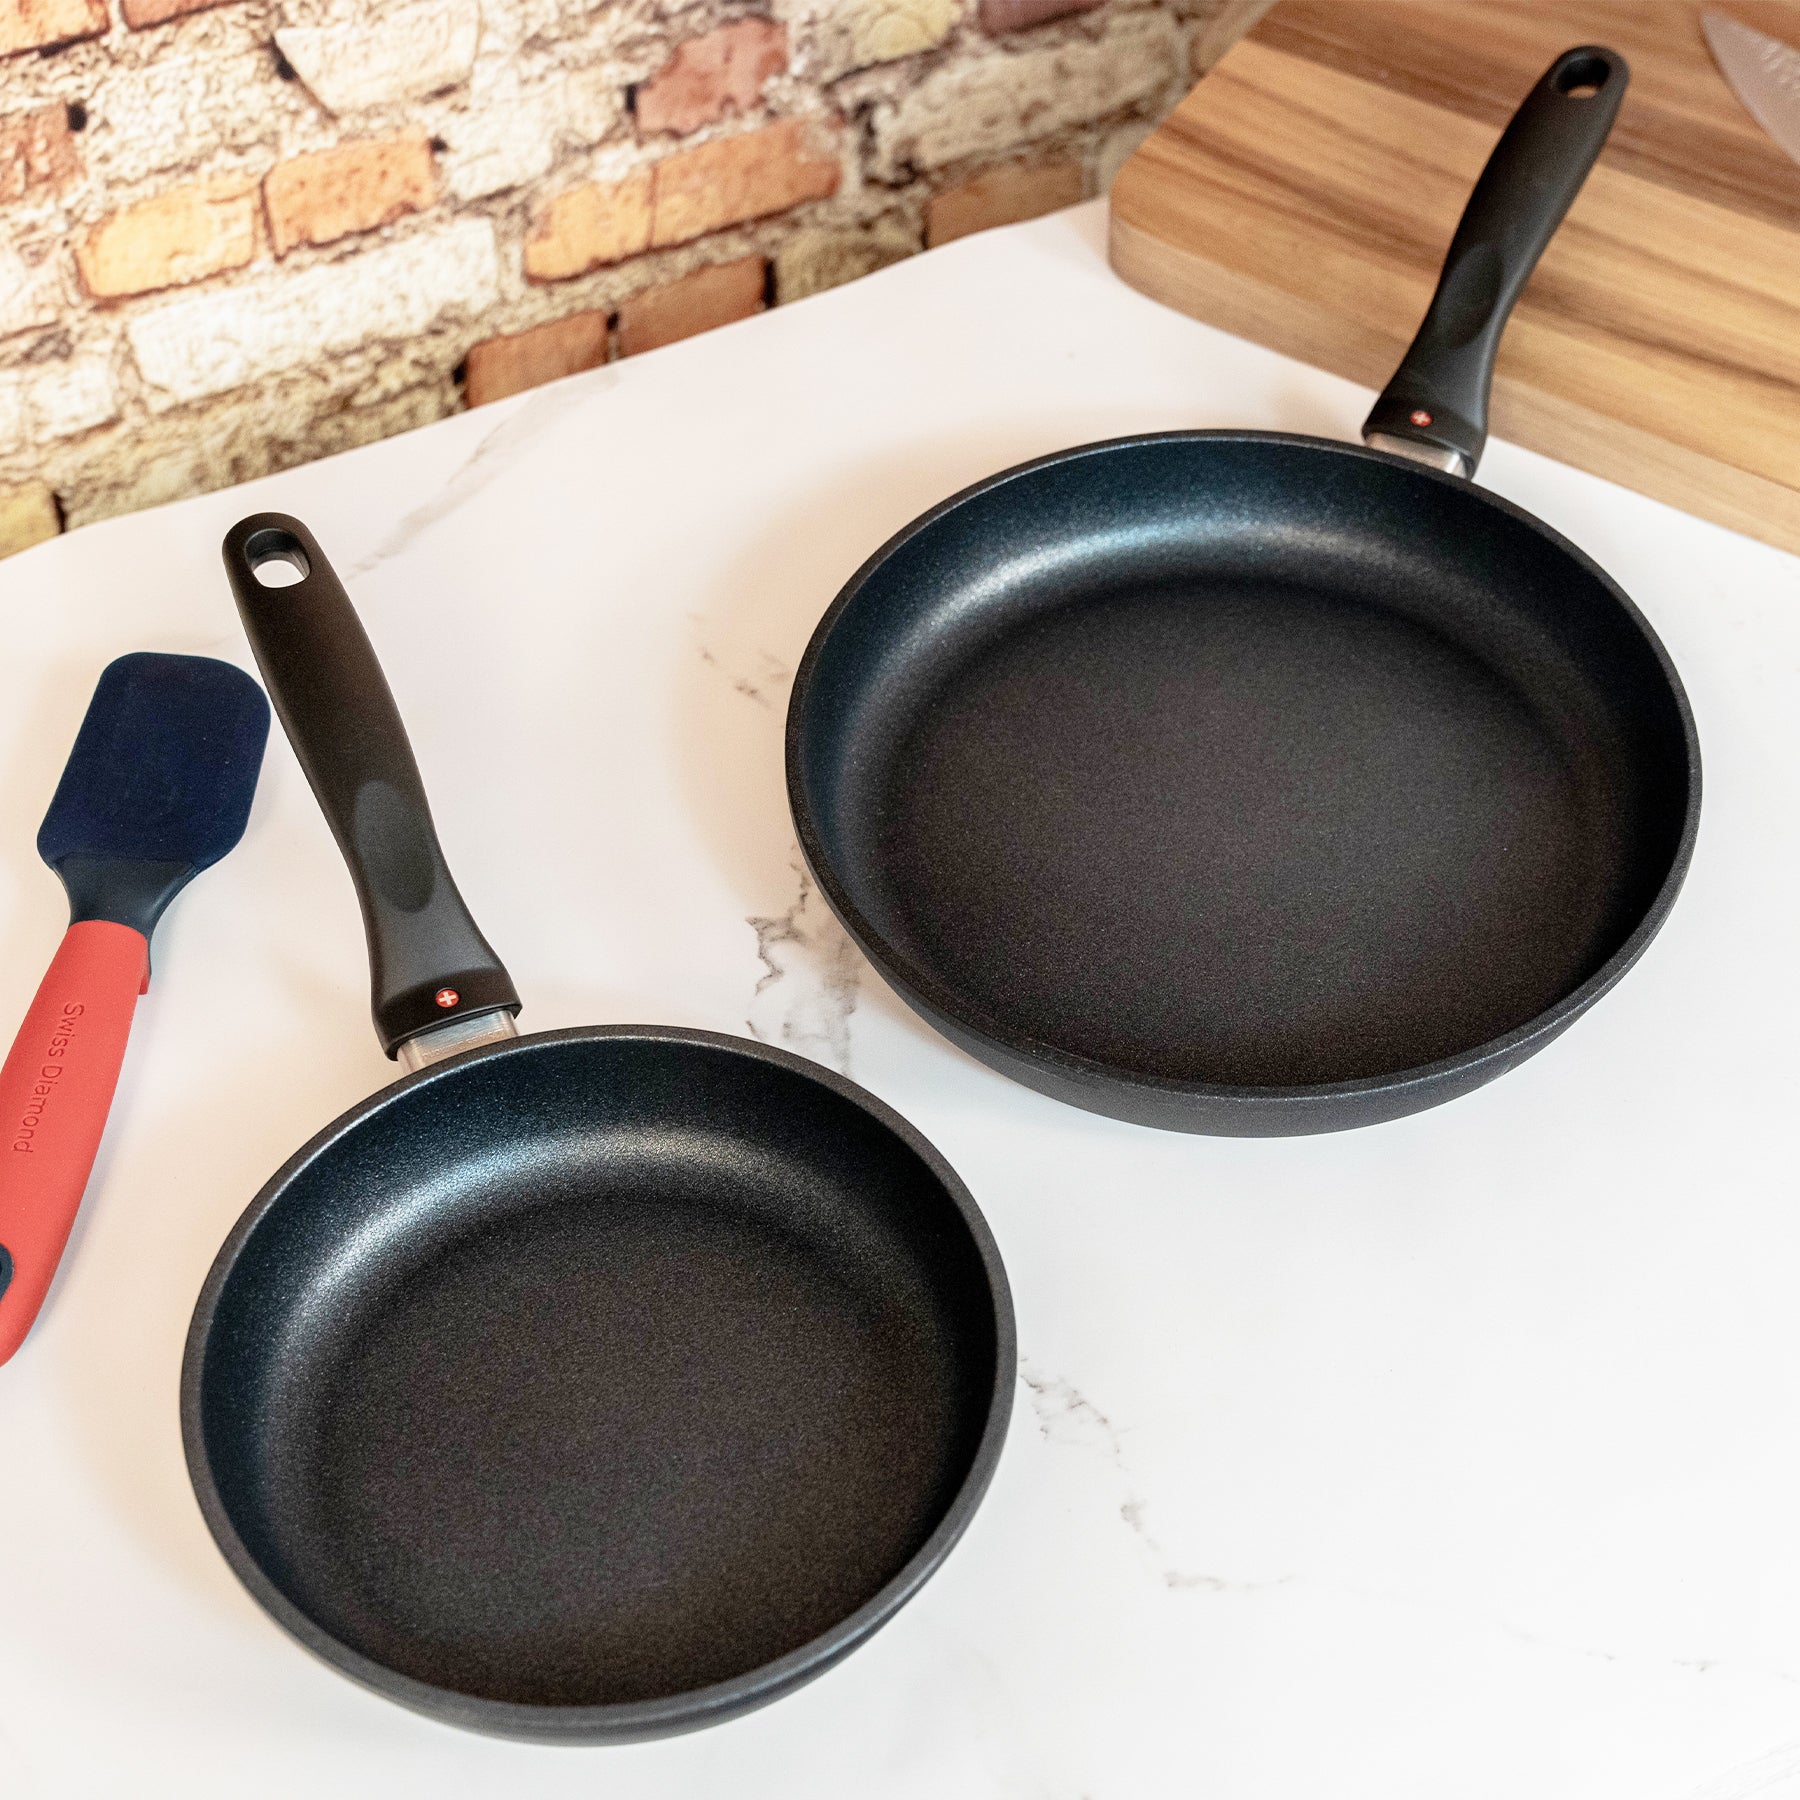 XD Nonstick 2-Piece Fry Pan Set on kitchen counter top view